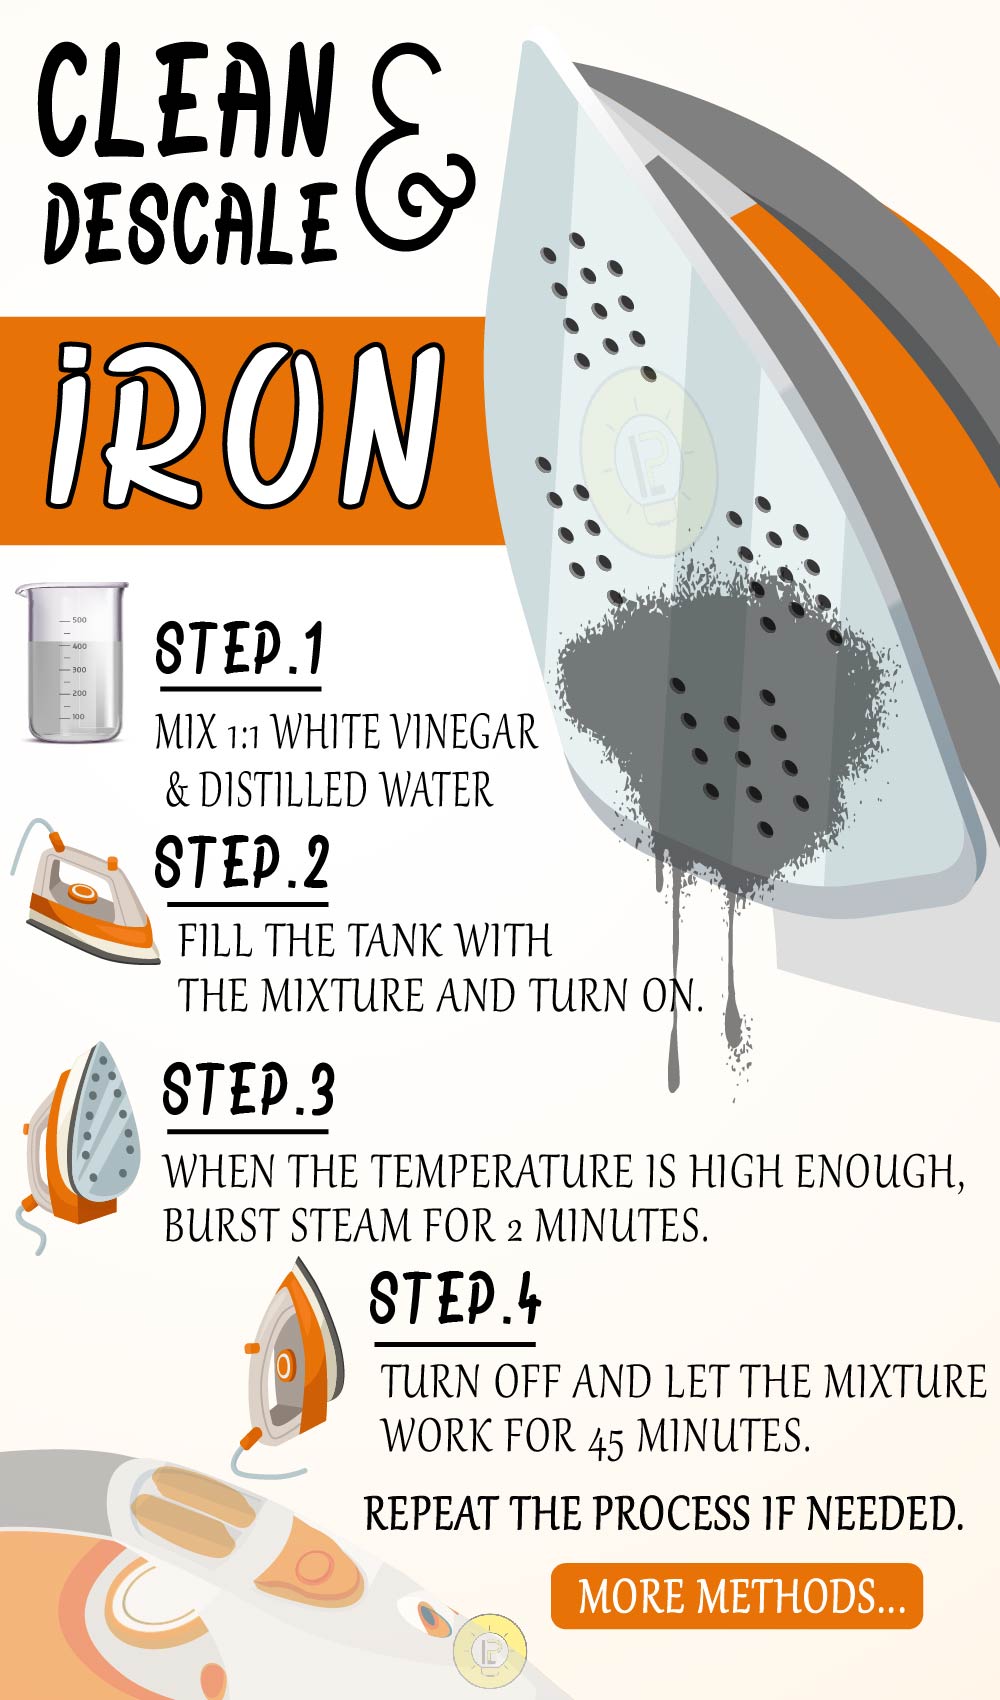 CLEAN AND DESCALE YOUR IRON AT HOME 01